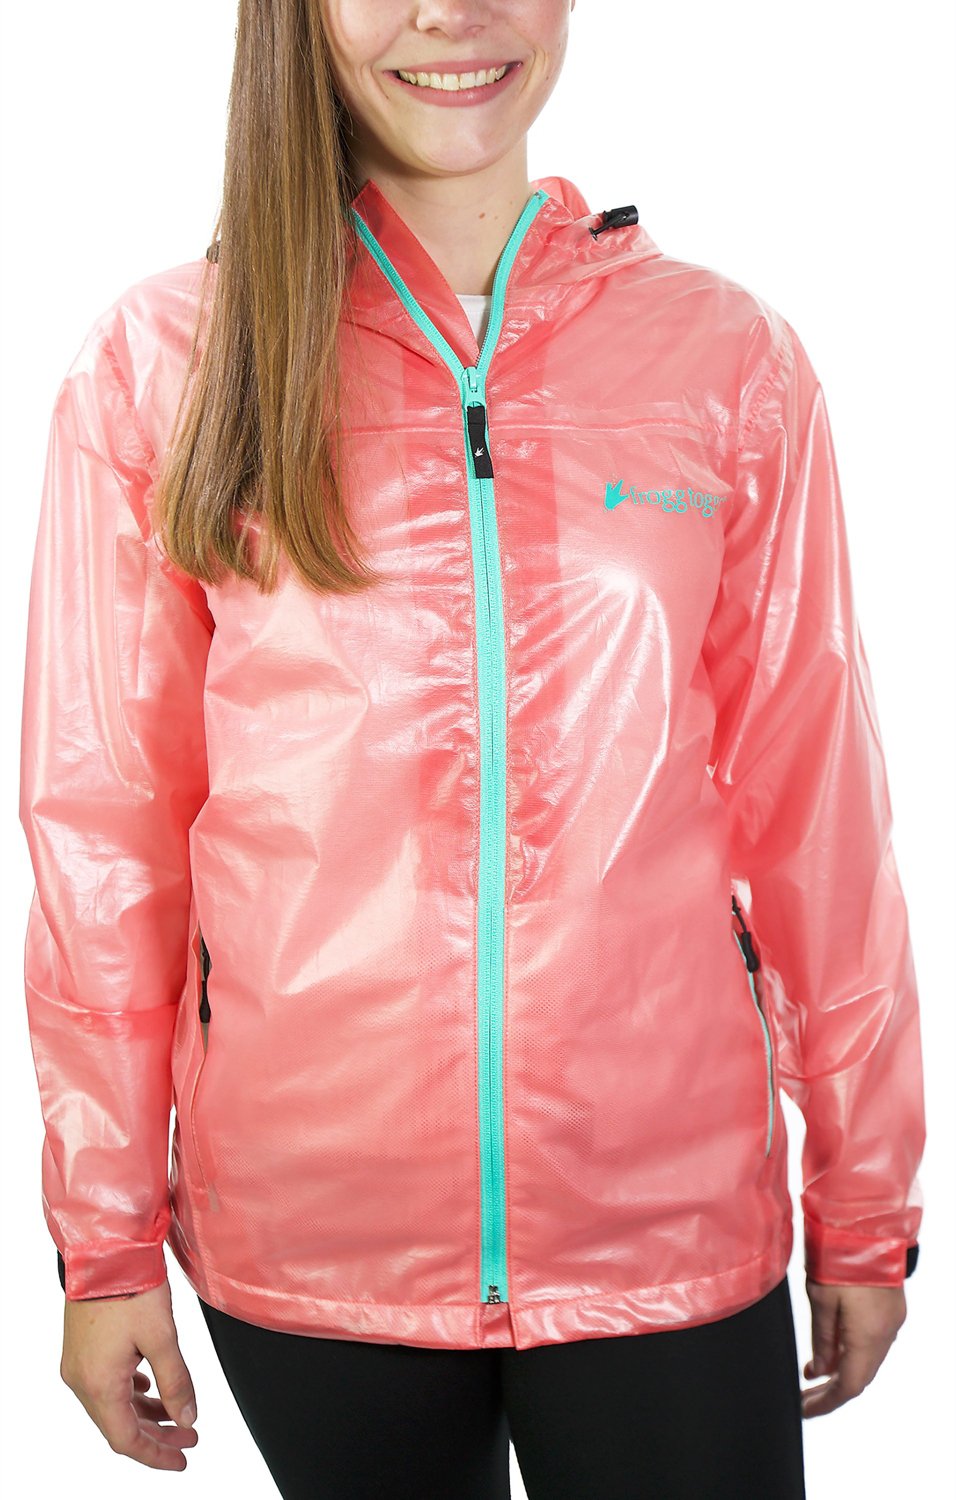 frogg toggs Womens Xtreme Lite Jacket